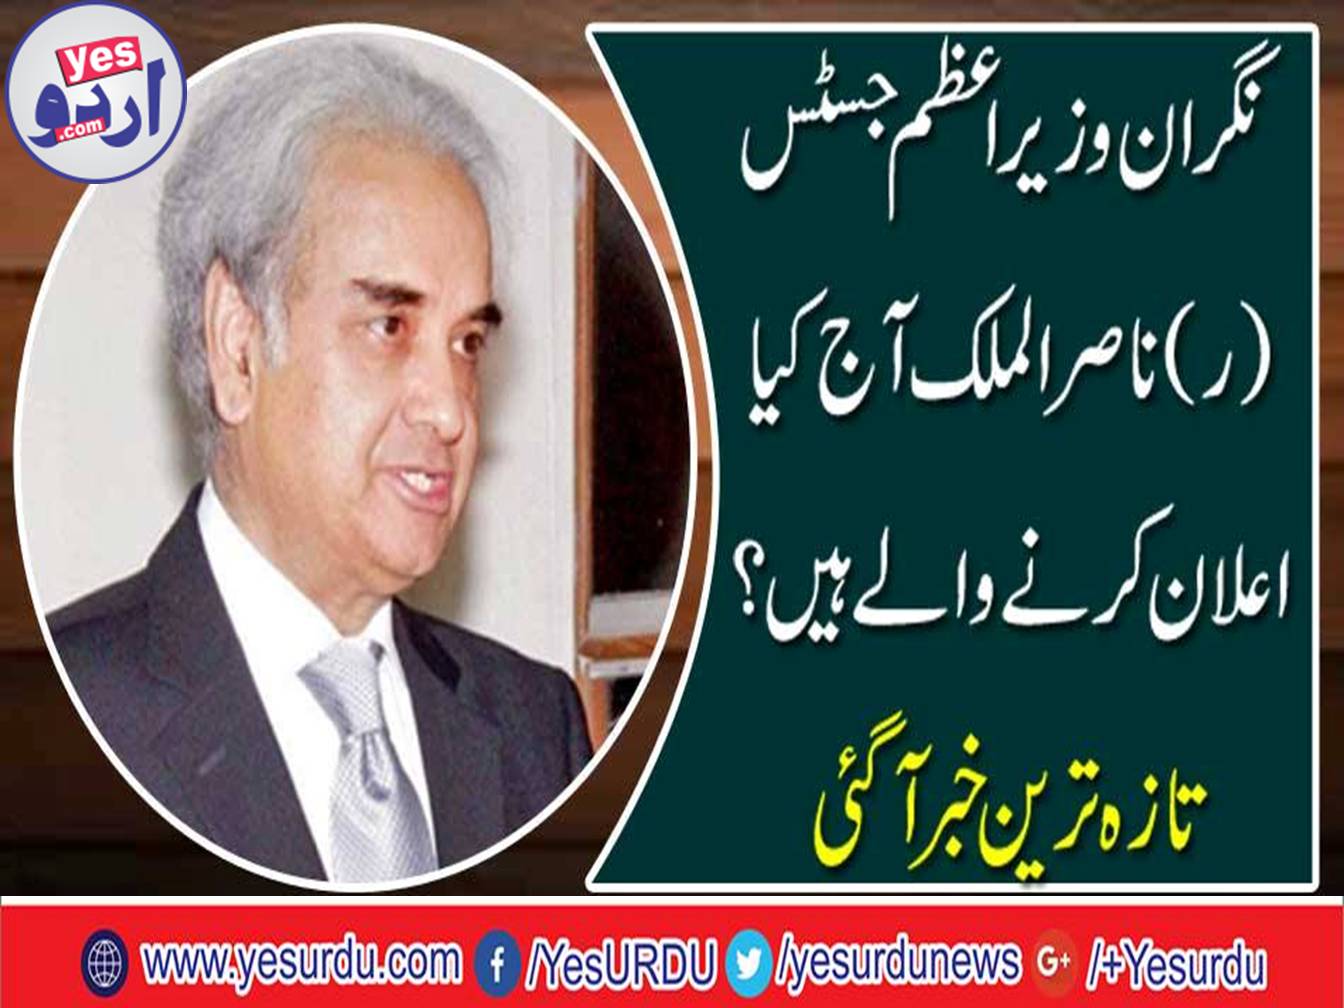 What are the announcement did the caretaker Prime Minister, Justice (R) Nasir ul-Mulk today?